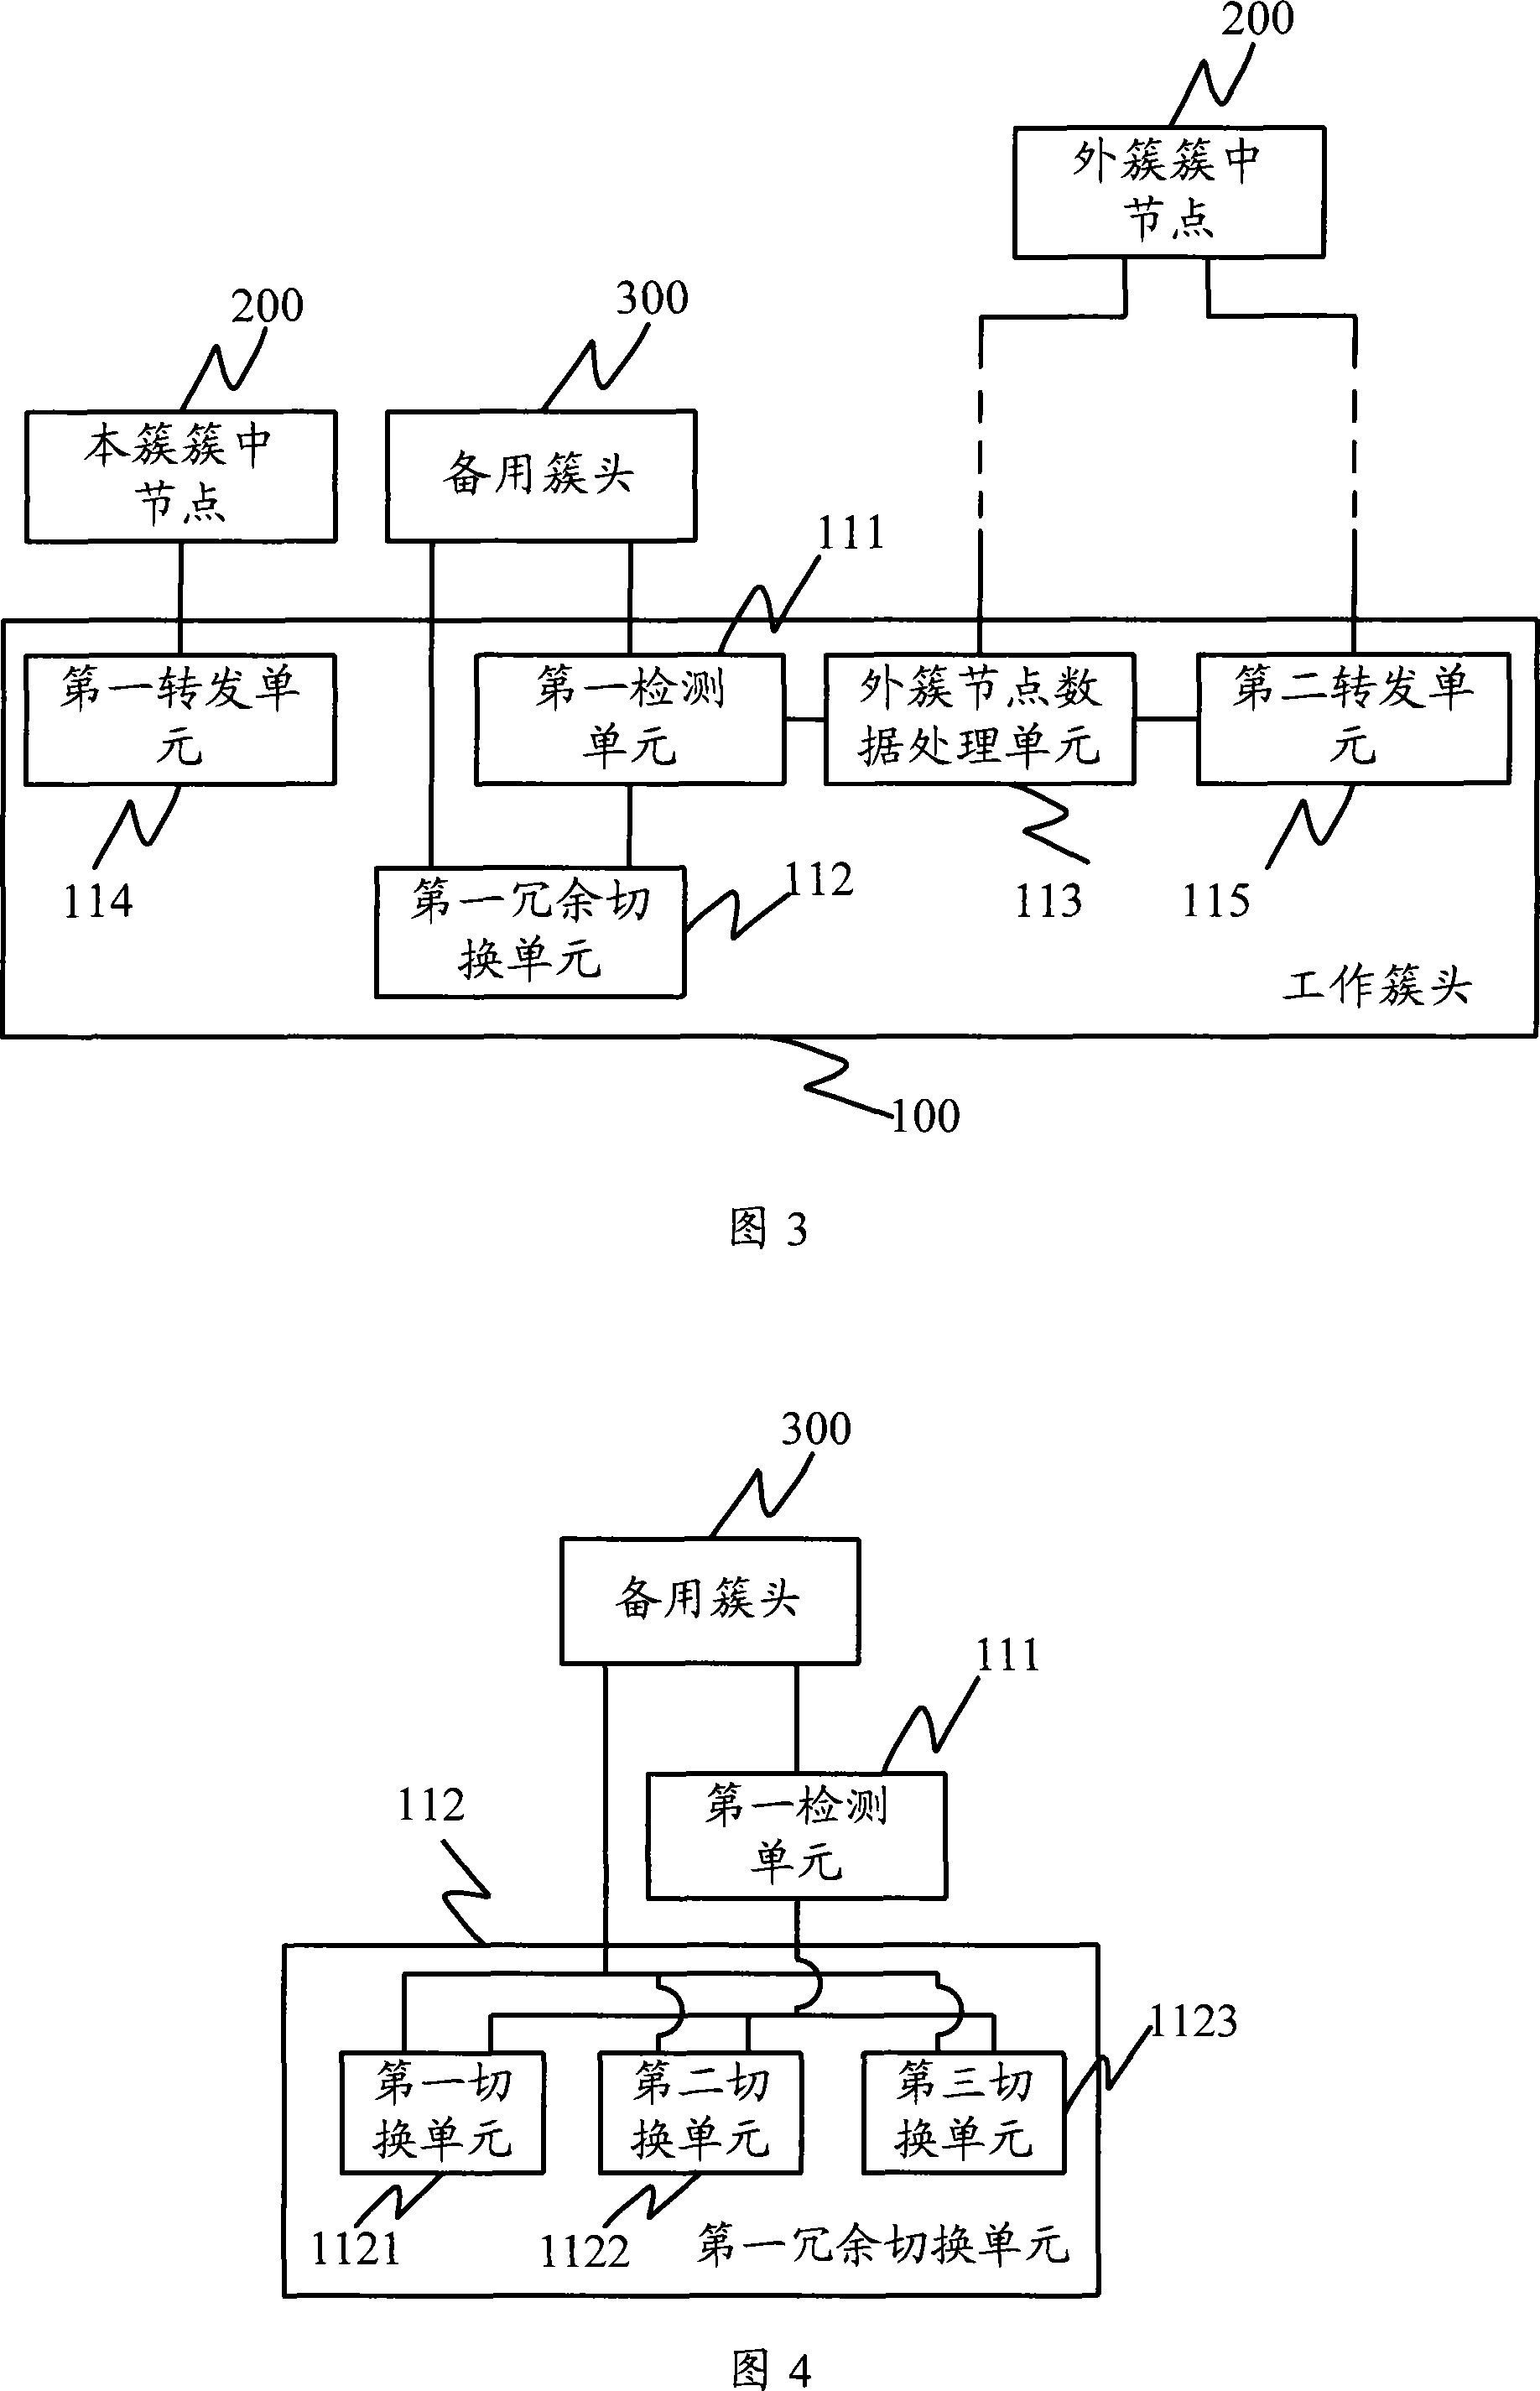 System of wireless sensor network, and cluster routing method based on the system